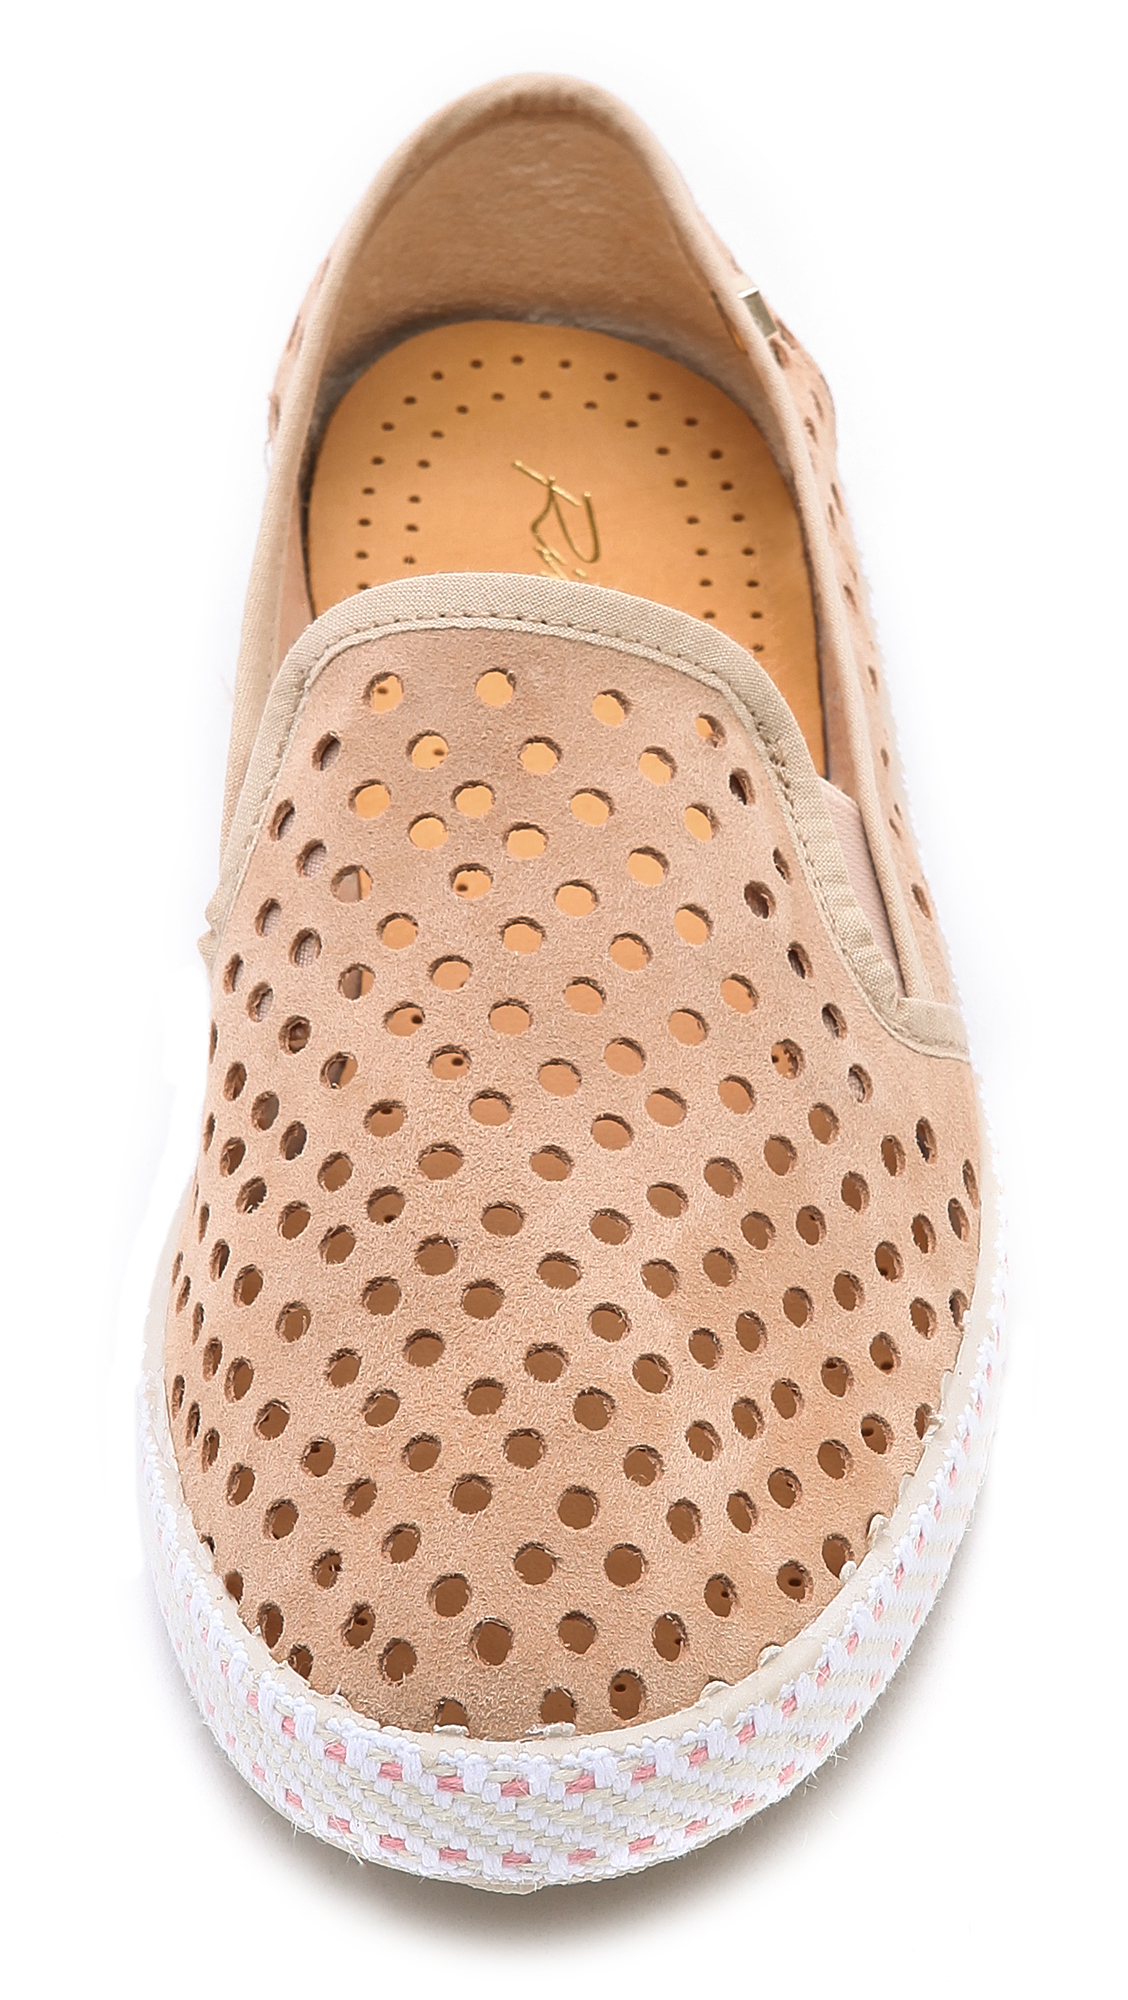 Lyst - Rivieras Sultan Slip On Perforated Sneakers in Natural